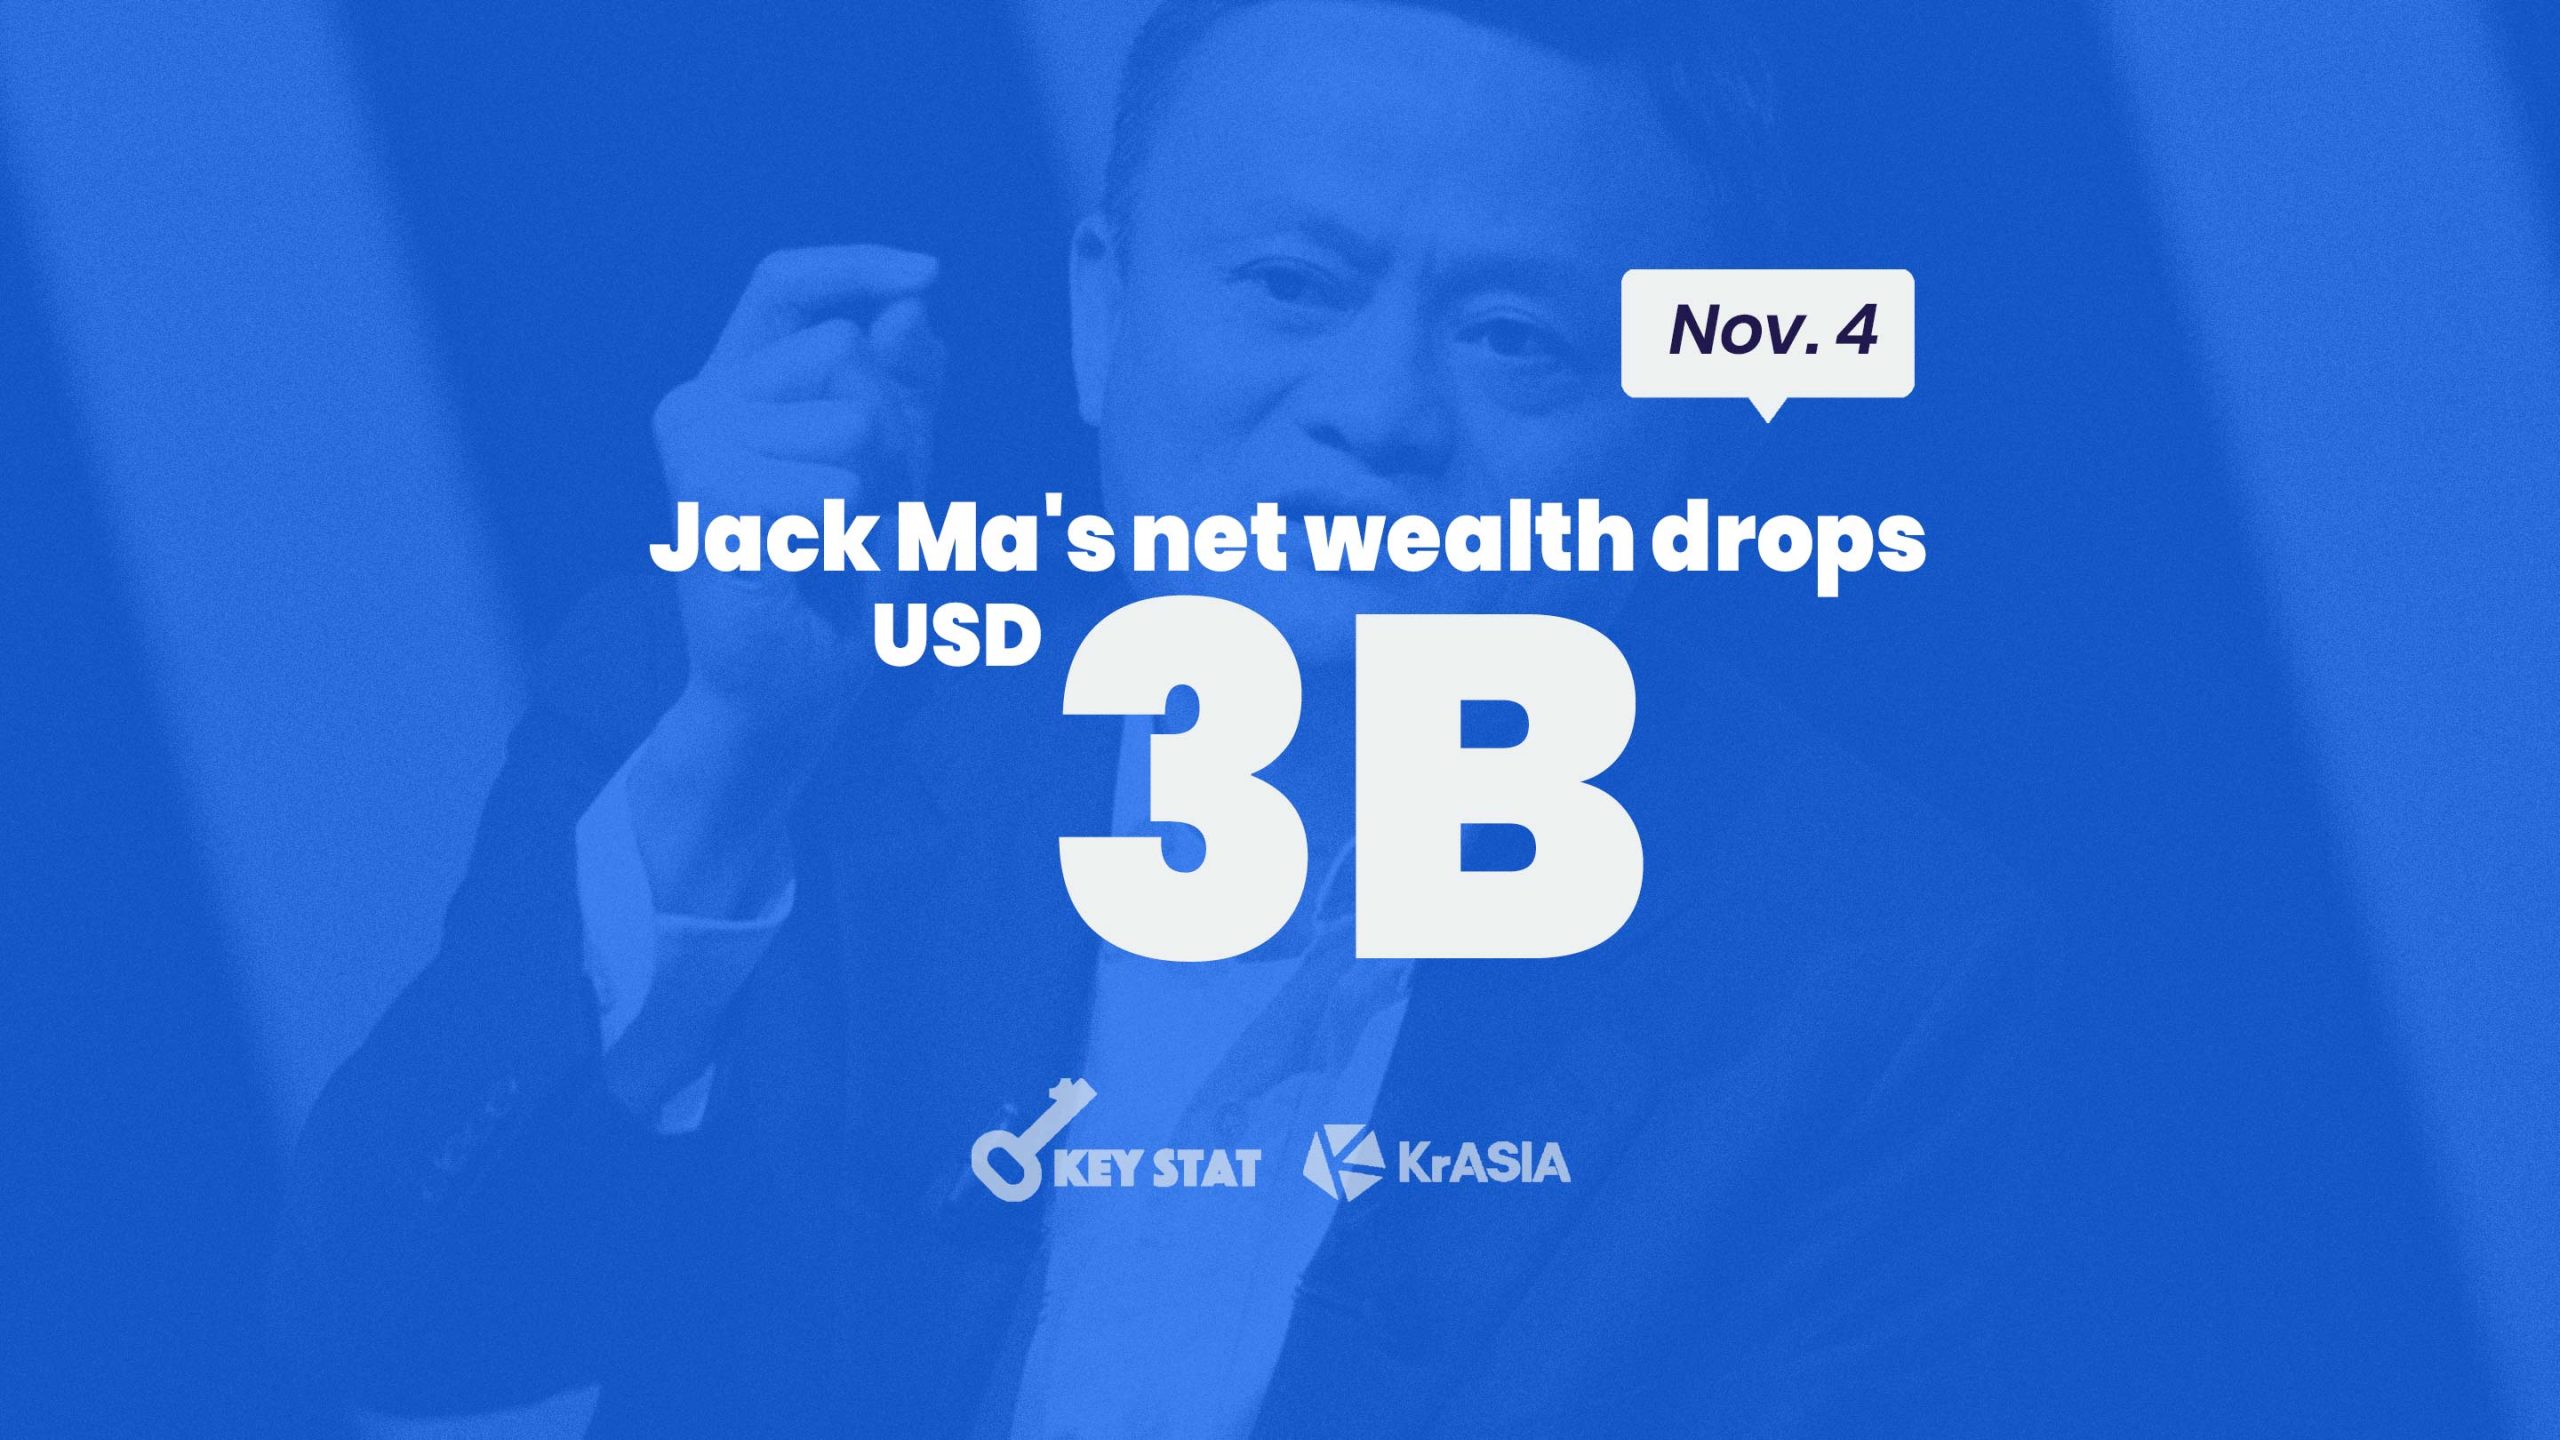 KEY STAT | Jack Ma’s wealth shrinks USD 3 billion as Ant’s IPO is suspended